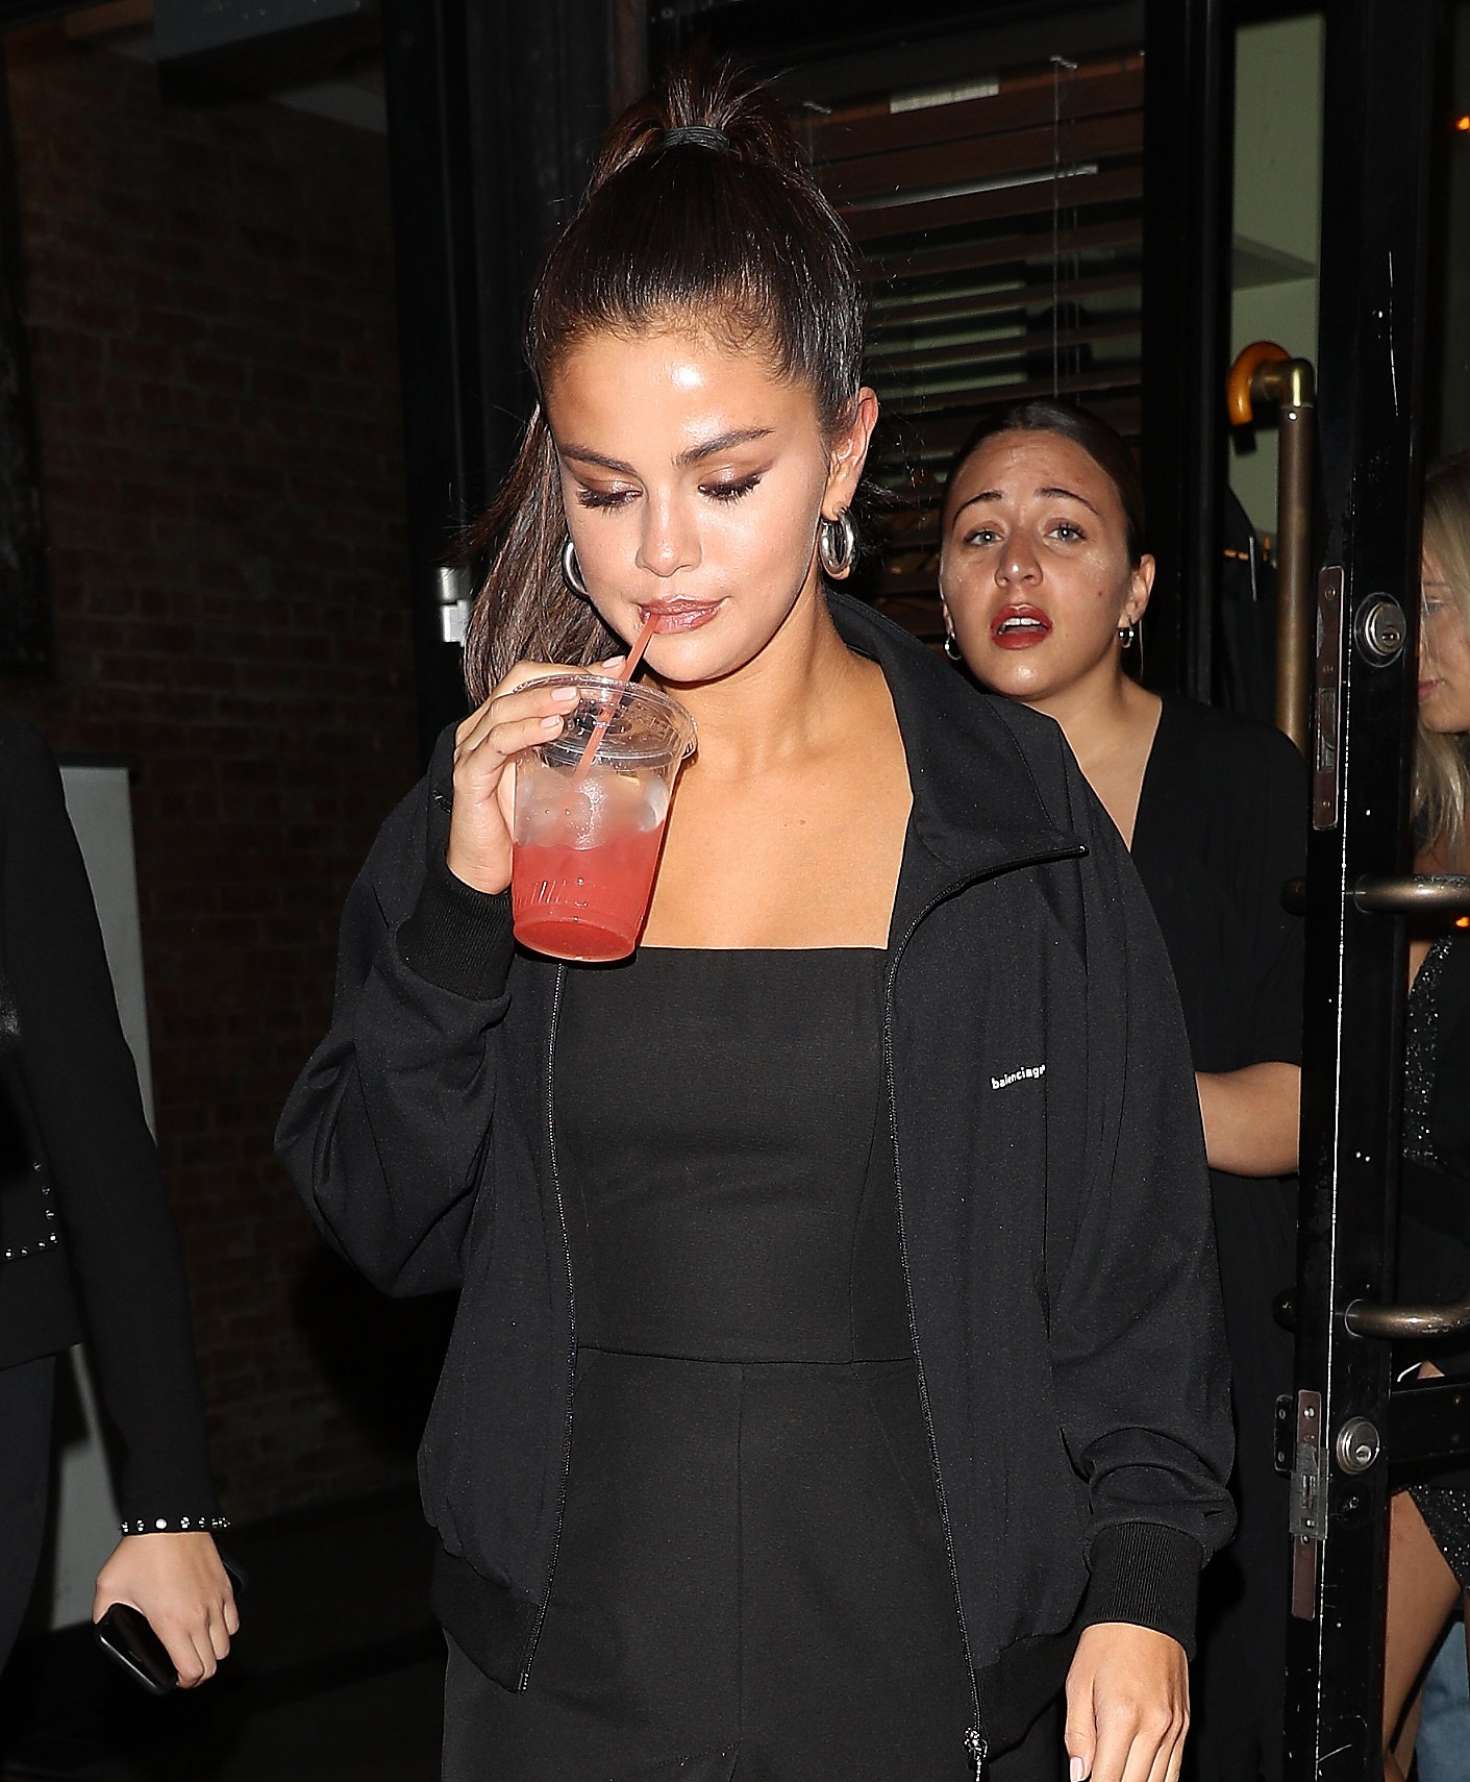 Selena Gomez in Black Dress â€“ Night out in NYC